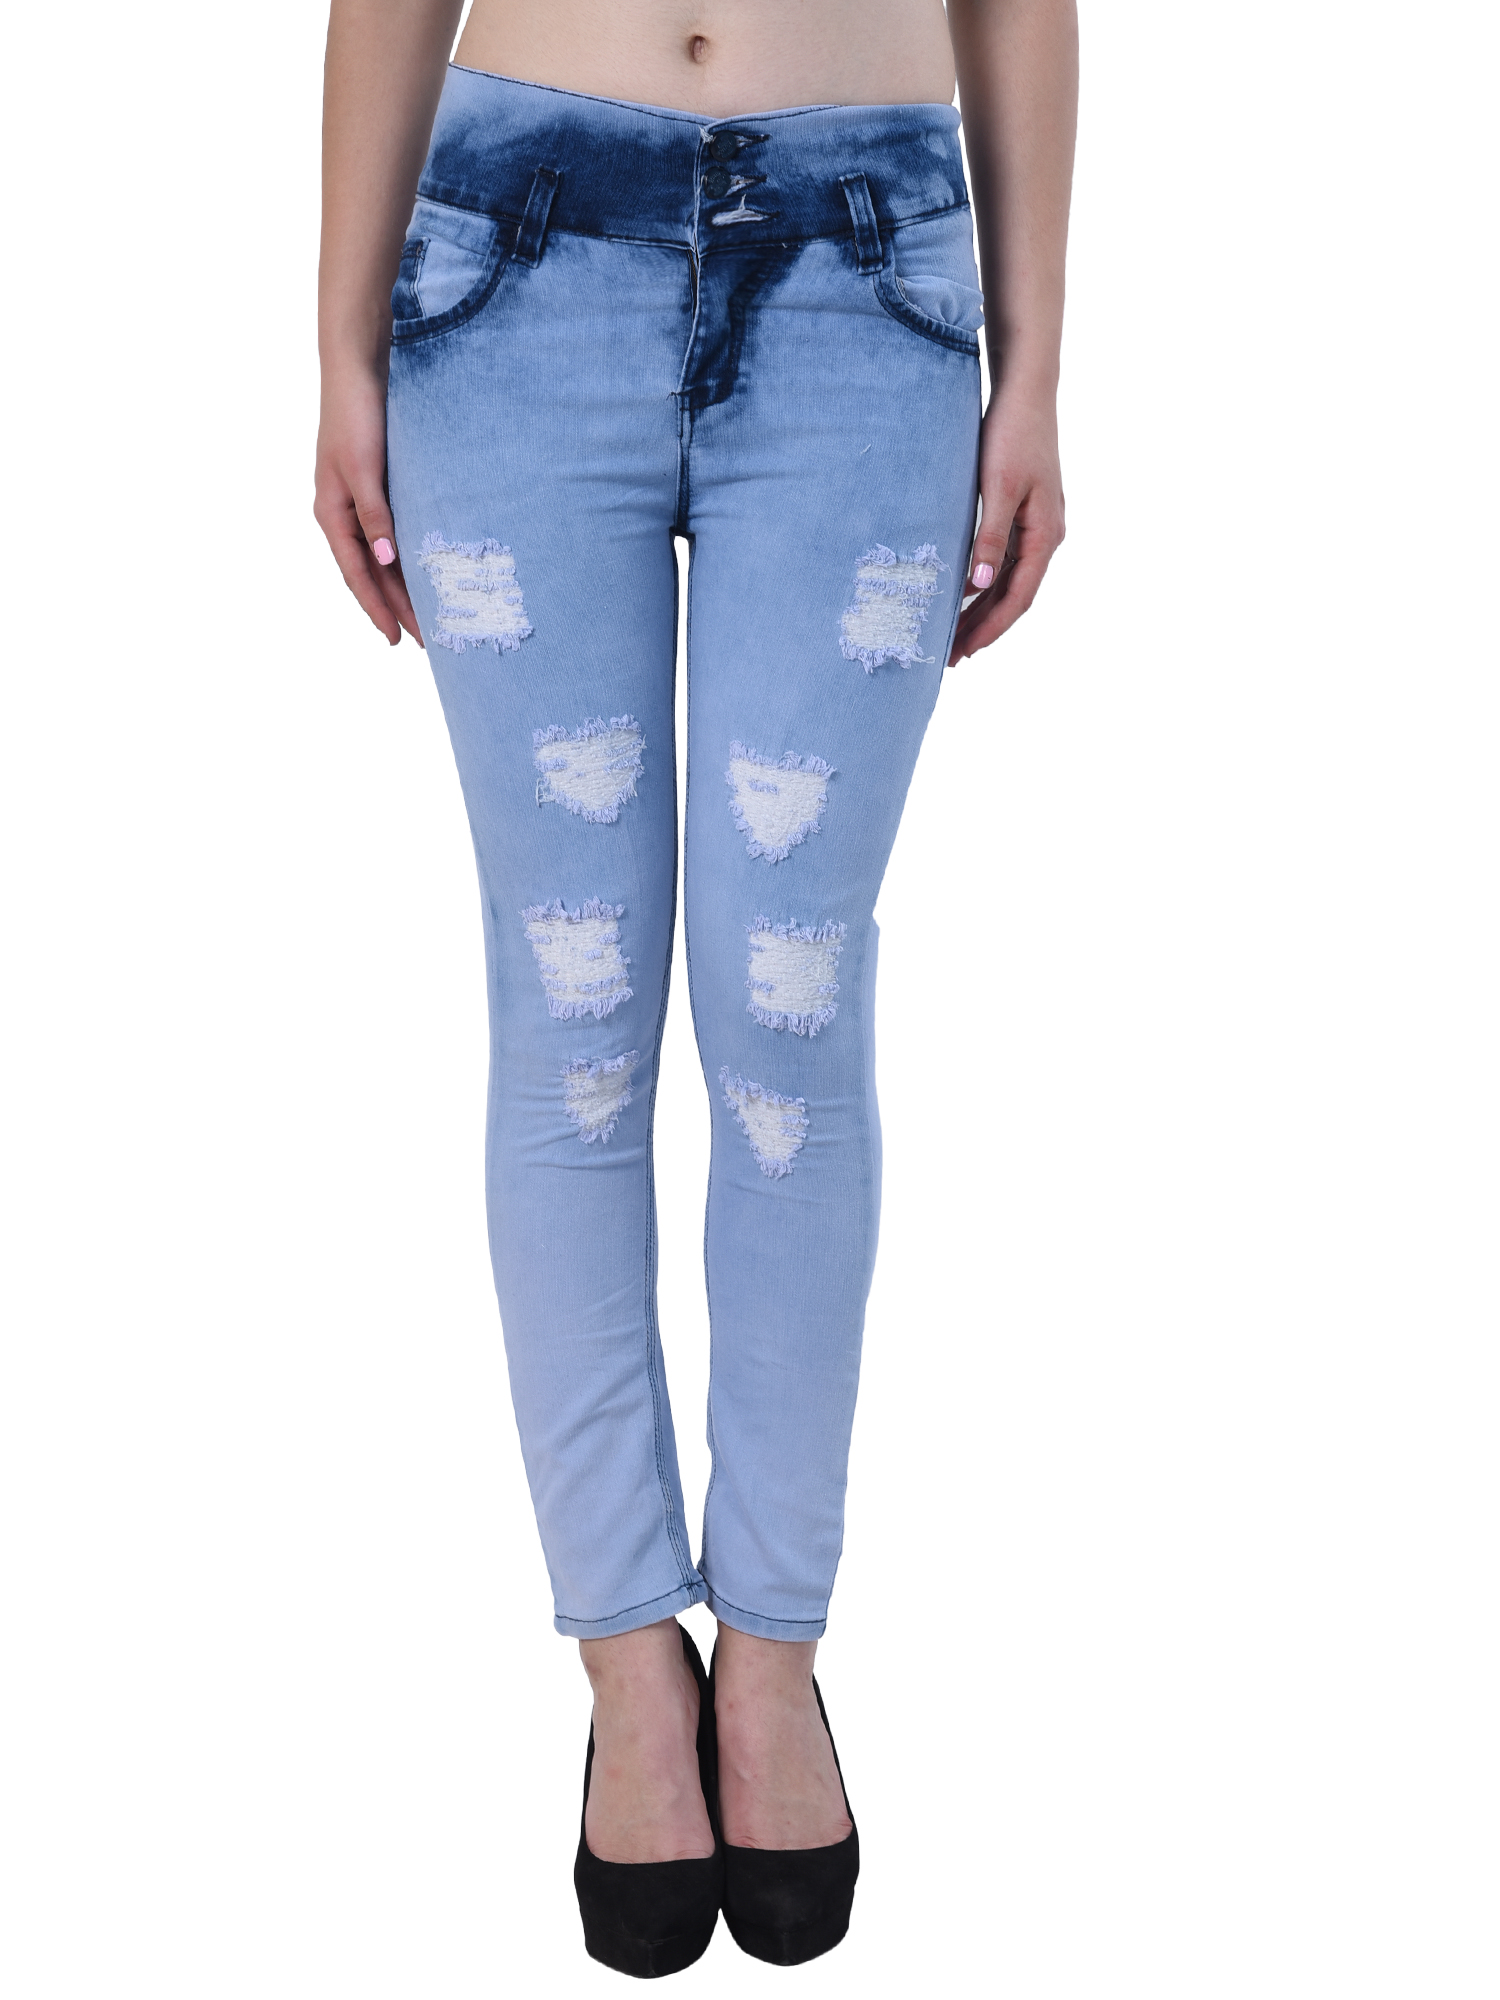 Buy Essence Women S Slim Fit Blue Color Ripped Washed Casual Jeans Online ₹799 From Shopclues